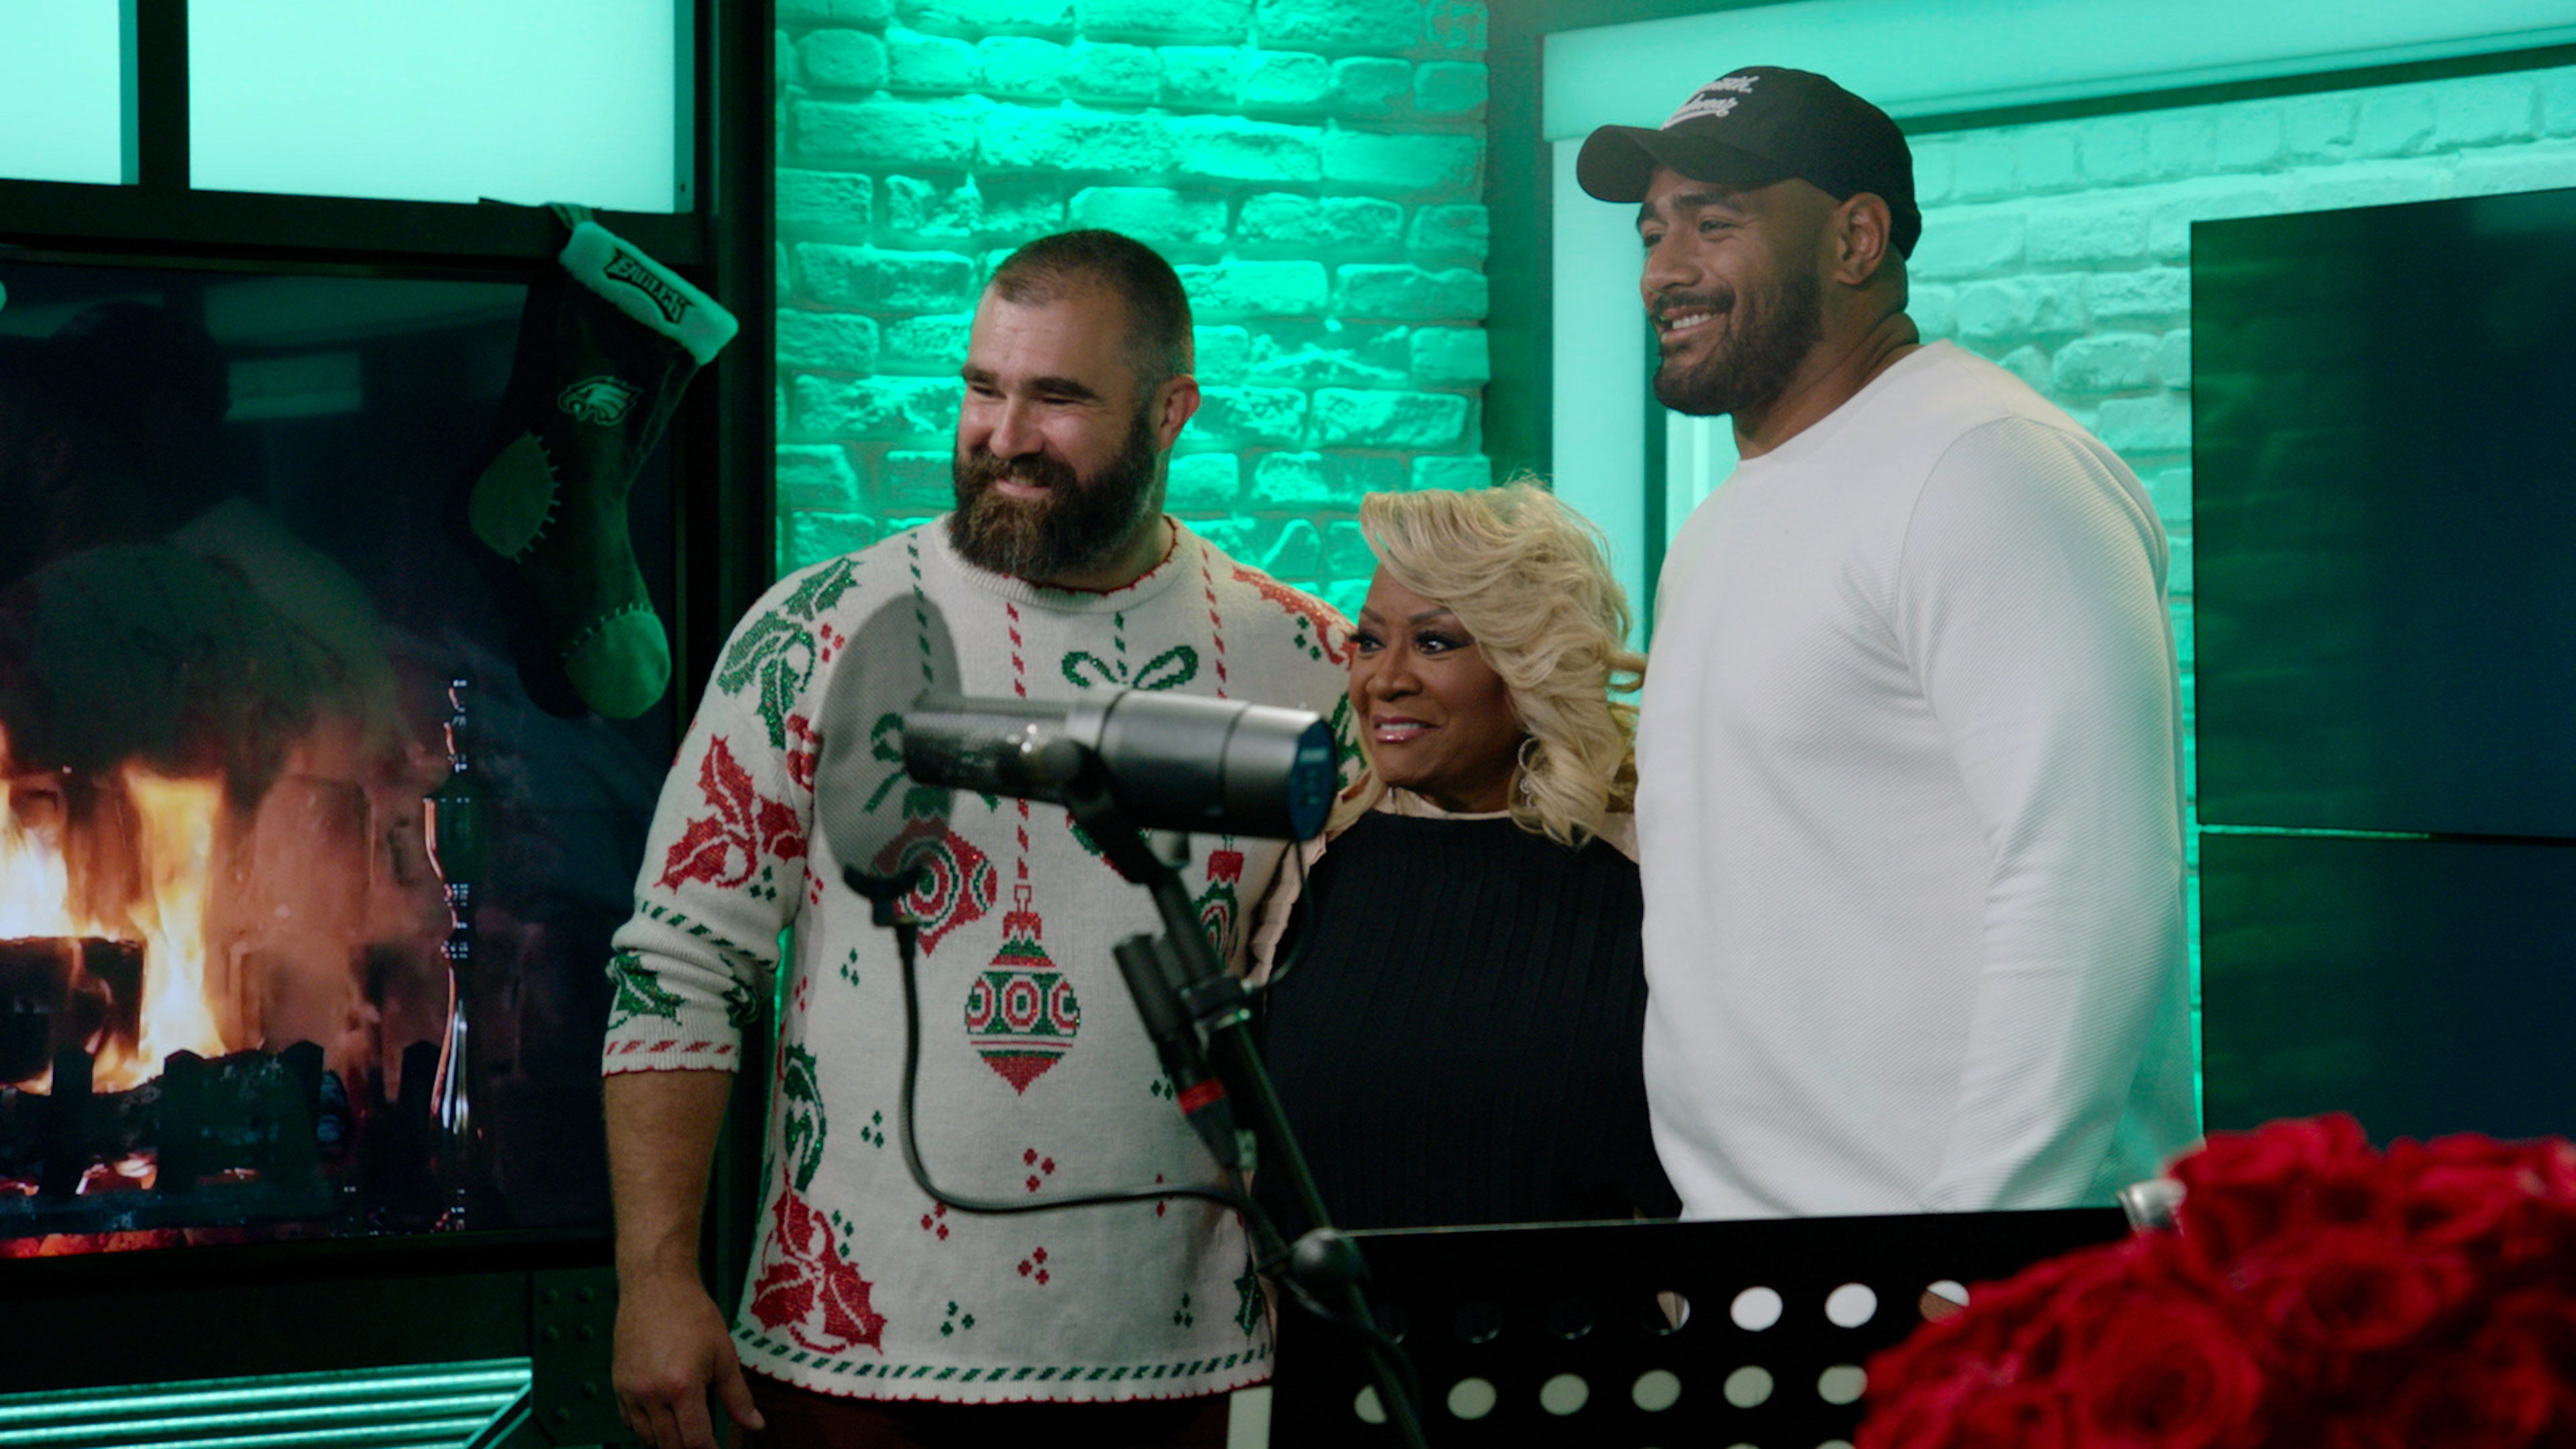 Jason Kelce Christmas Special - Santa's Night 7 Inch Vinyl and Puzzle – A  Philly Special Christmas